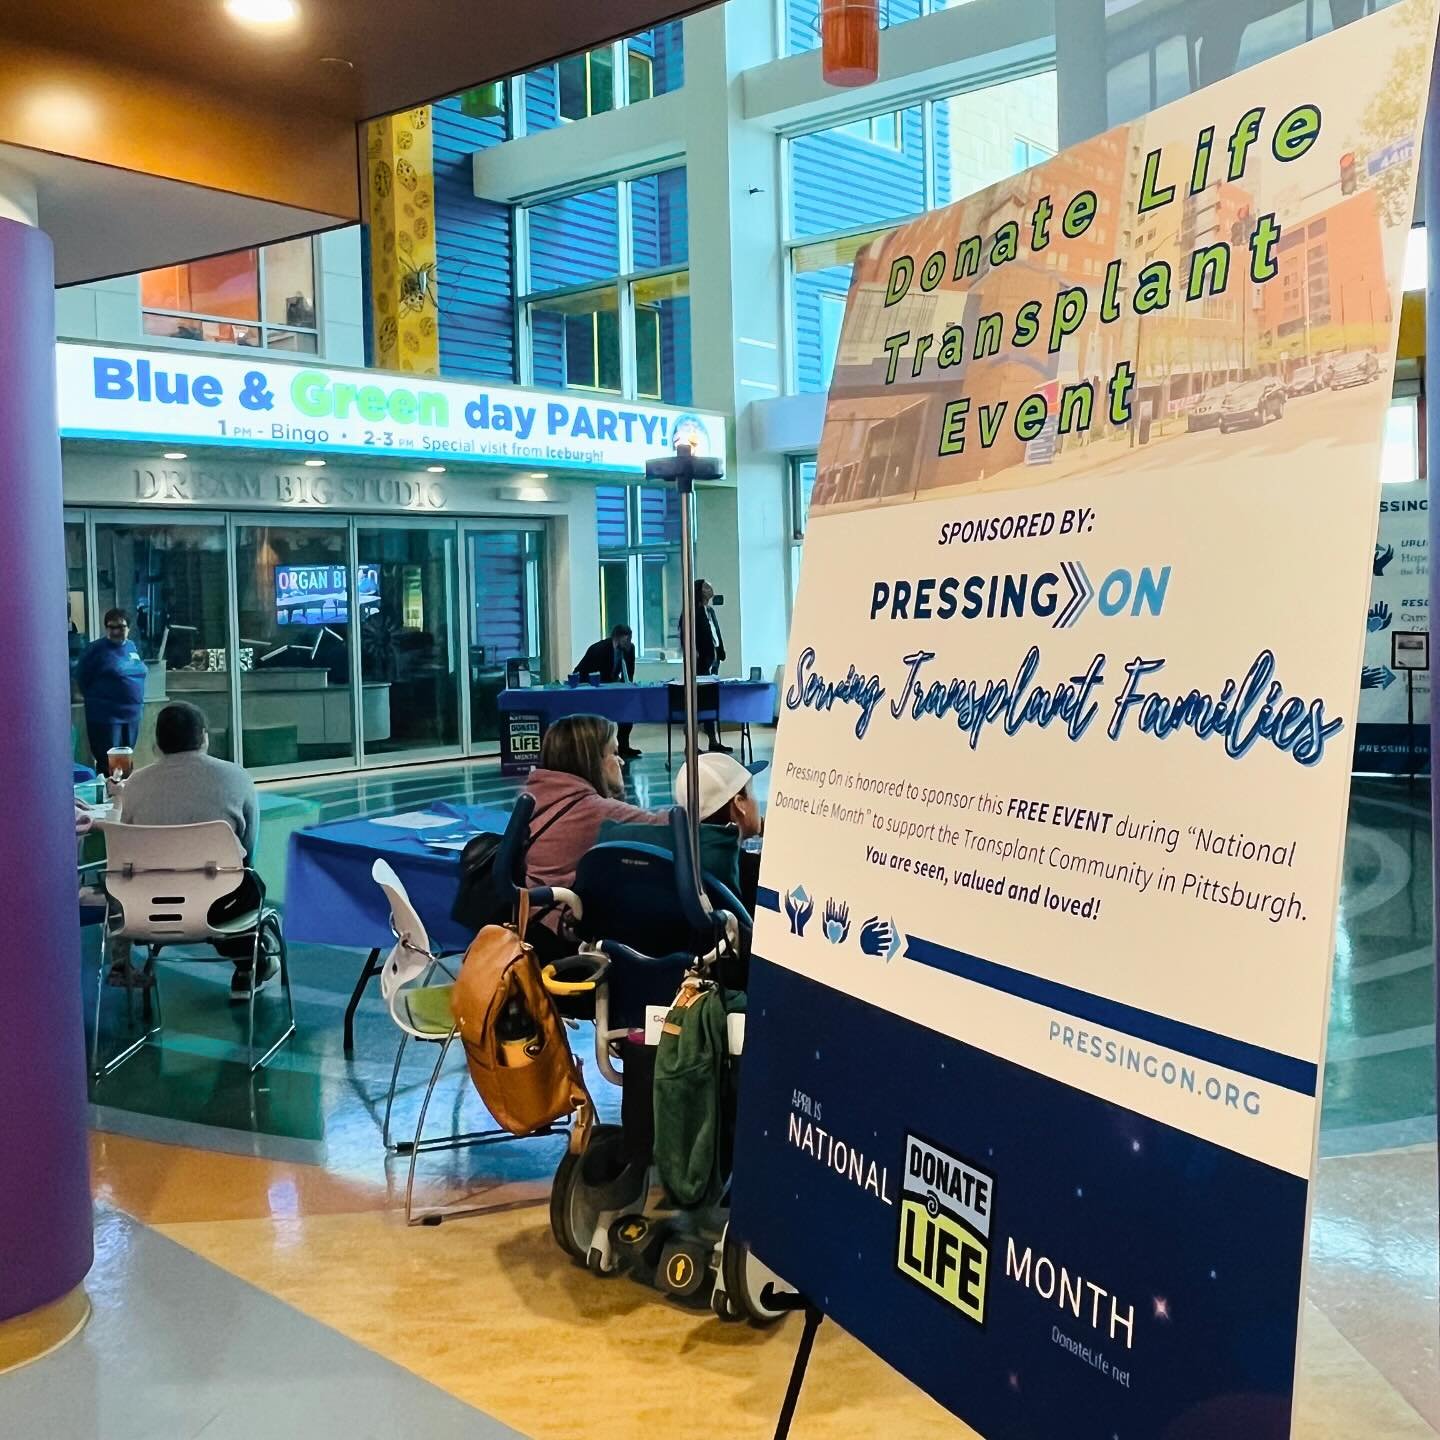 Yesterday, during National Donate Life Month&rsquo;s &ldquo;Blue &amp; Green Day,&rdquo; we had the opportunity to sponsor a special event to serve transplant patients, provide resources and converse with their families at CHP. From Bingo &amp; Craft